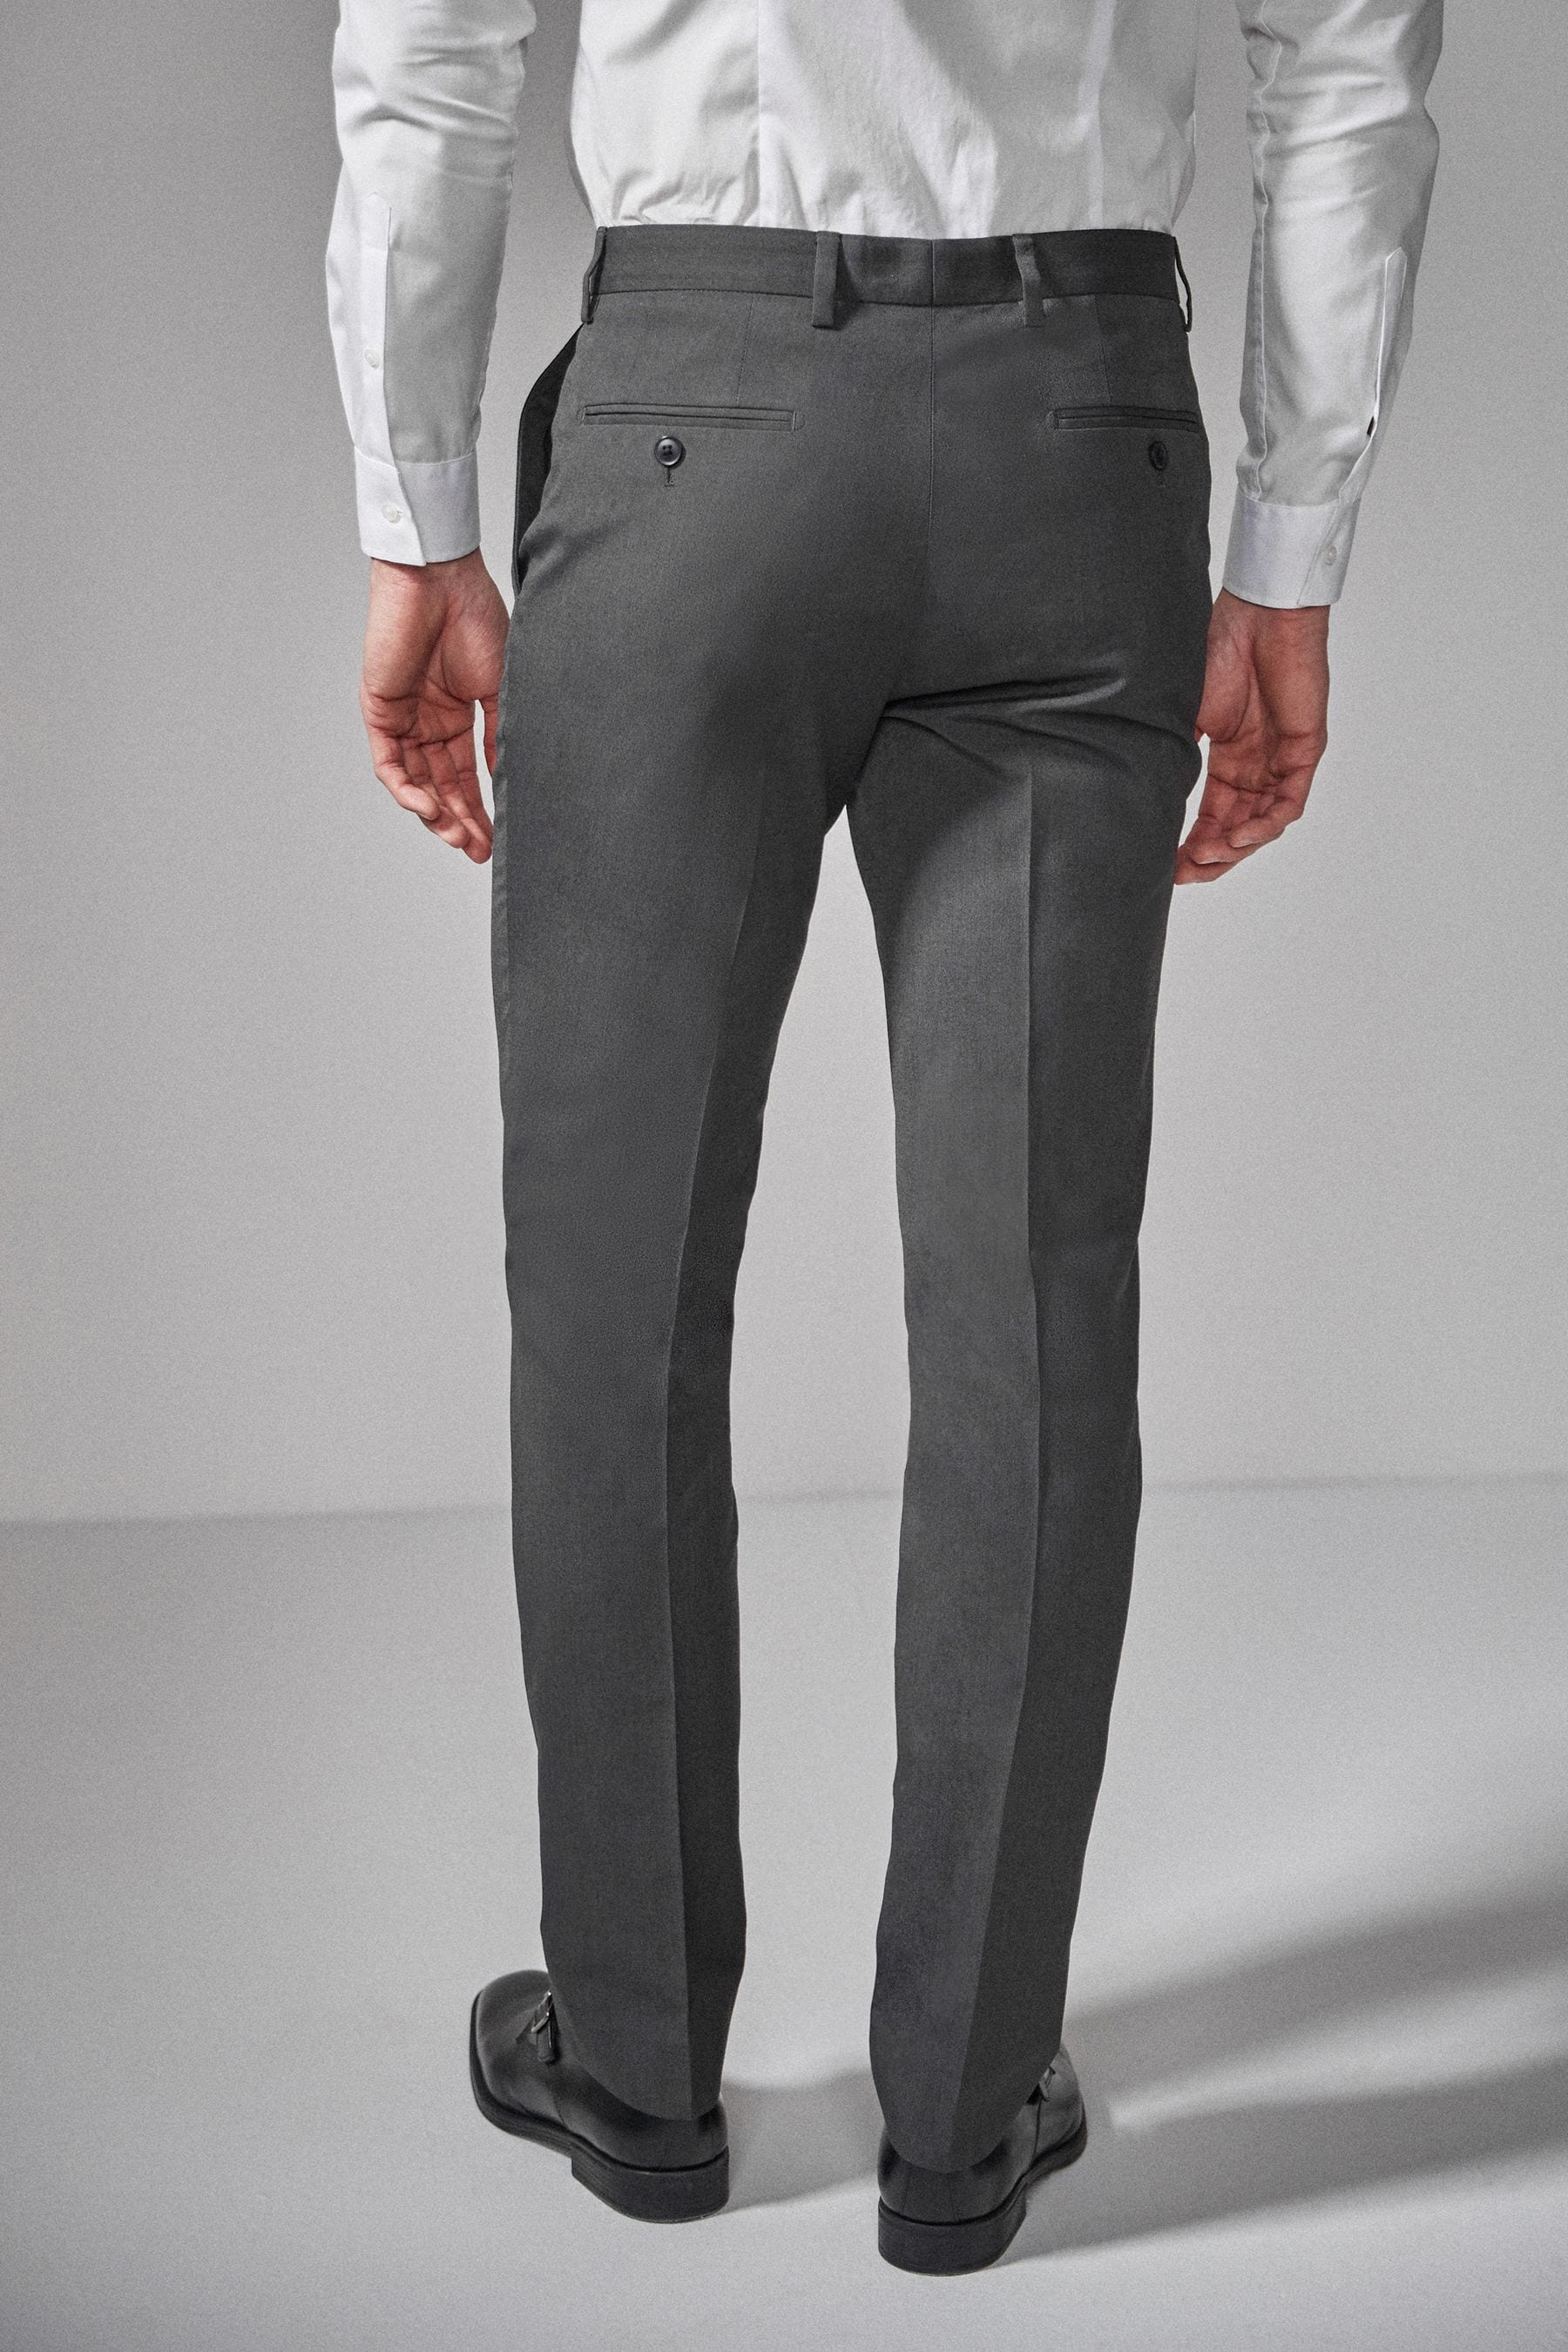 Solid Pictures Of Dark Grey Formal Trousers, Slim Fit at Rs 275/piece in  Bhilwara